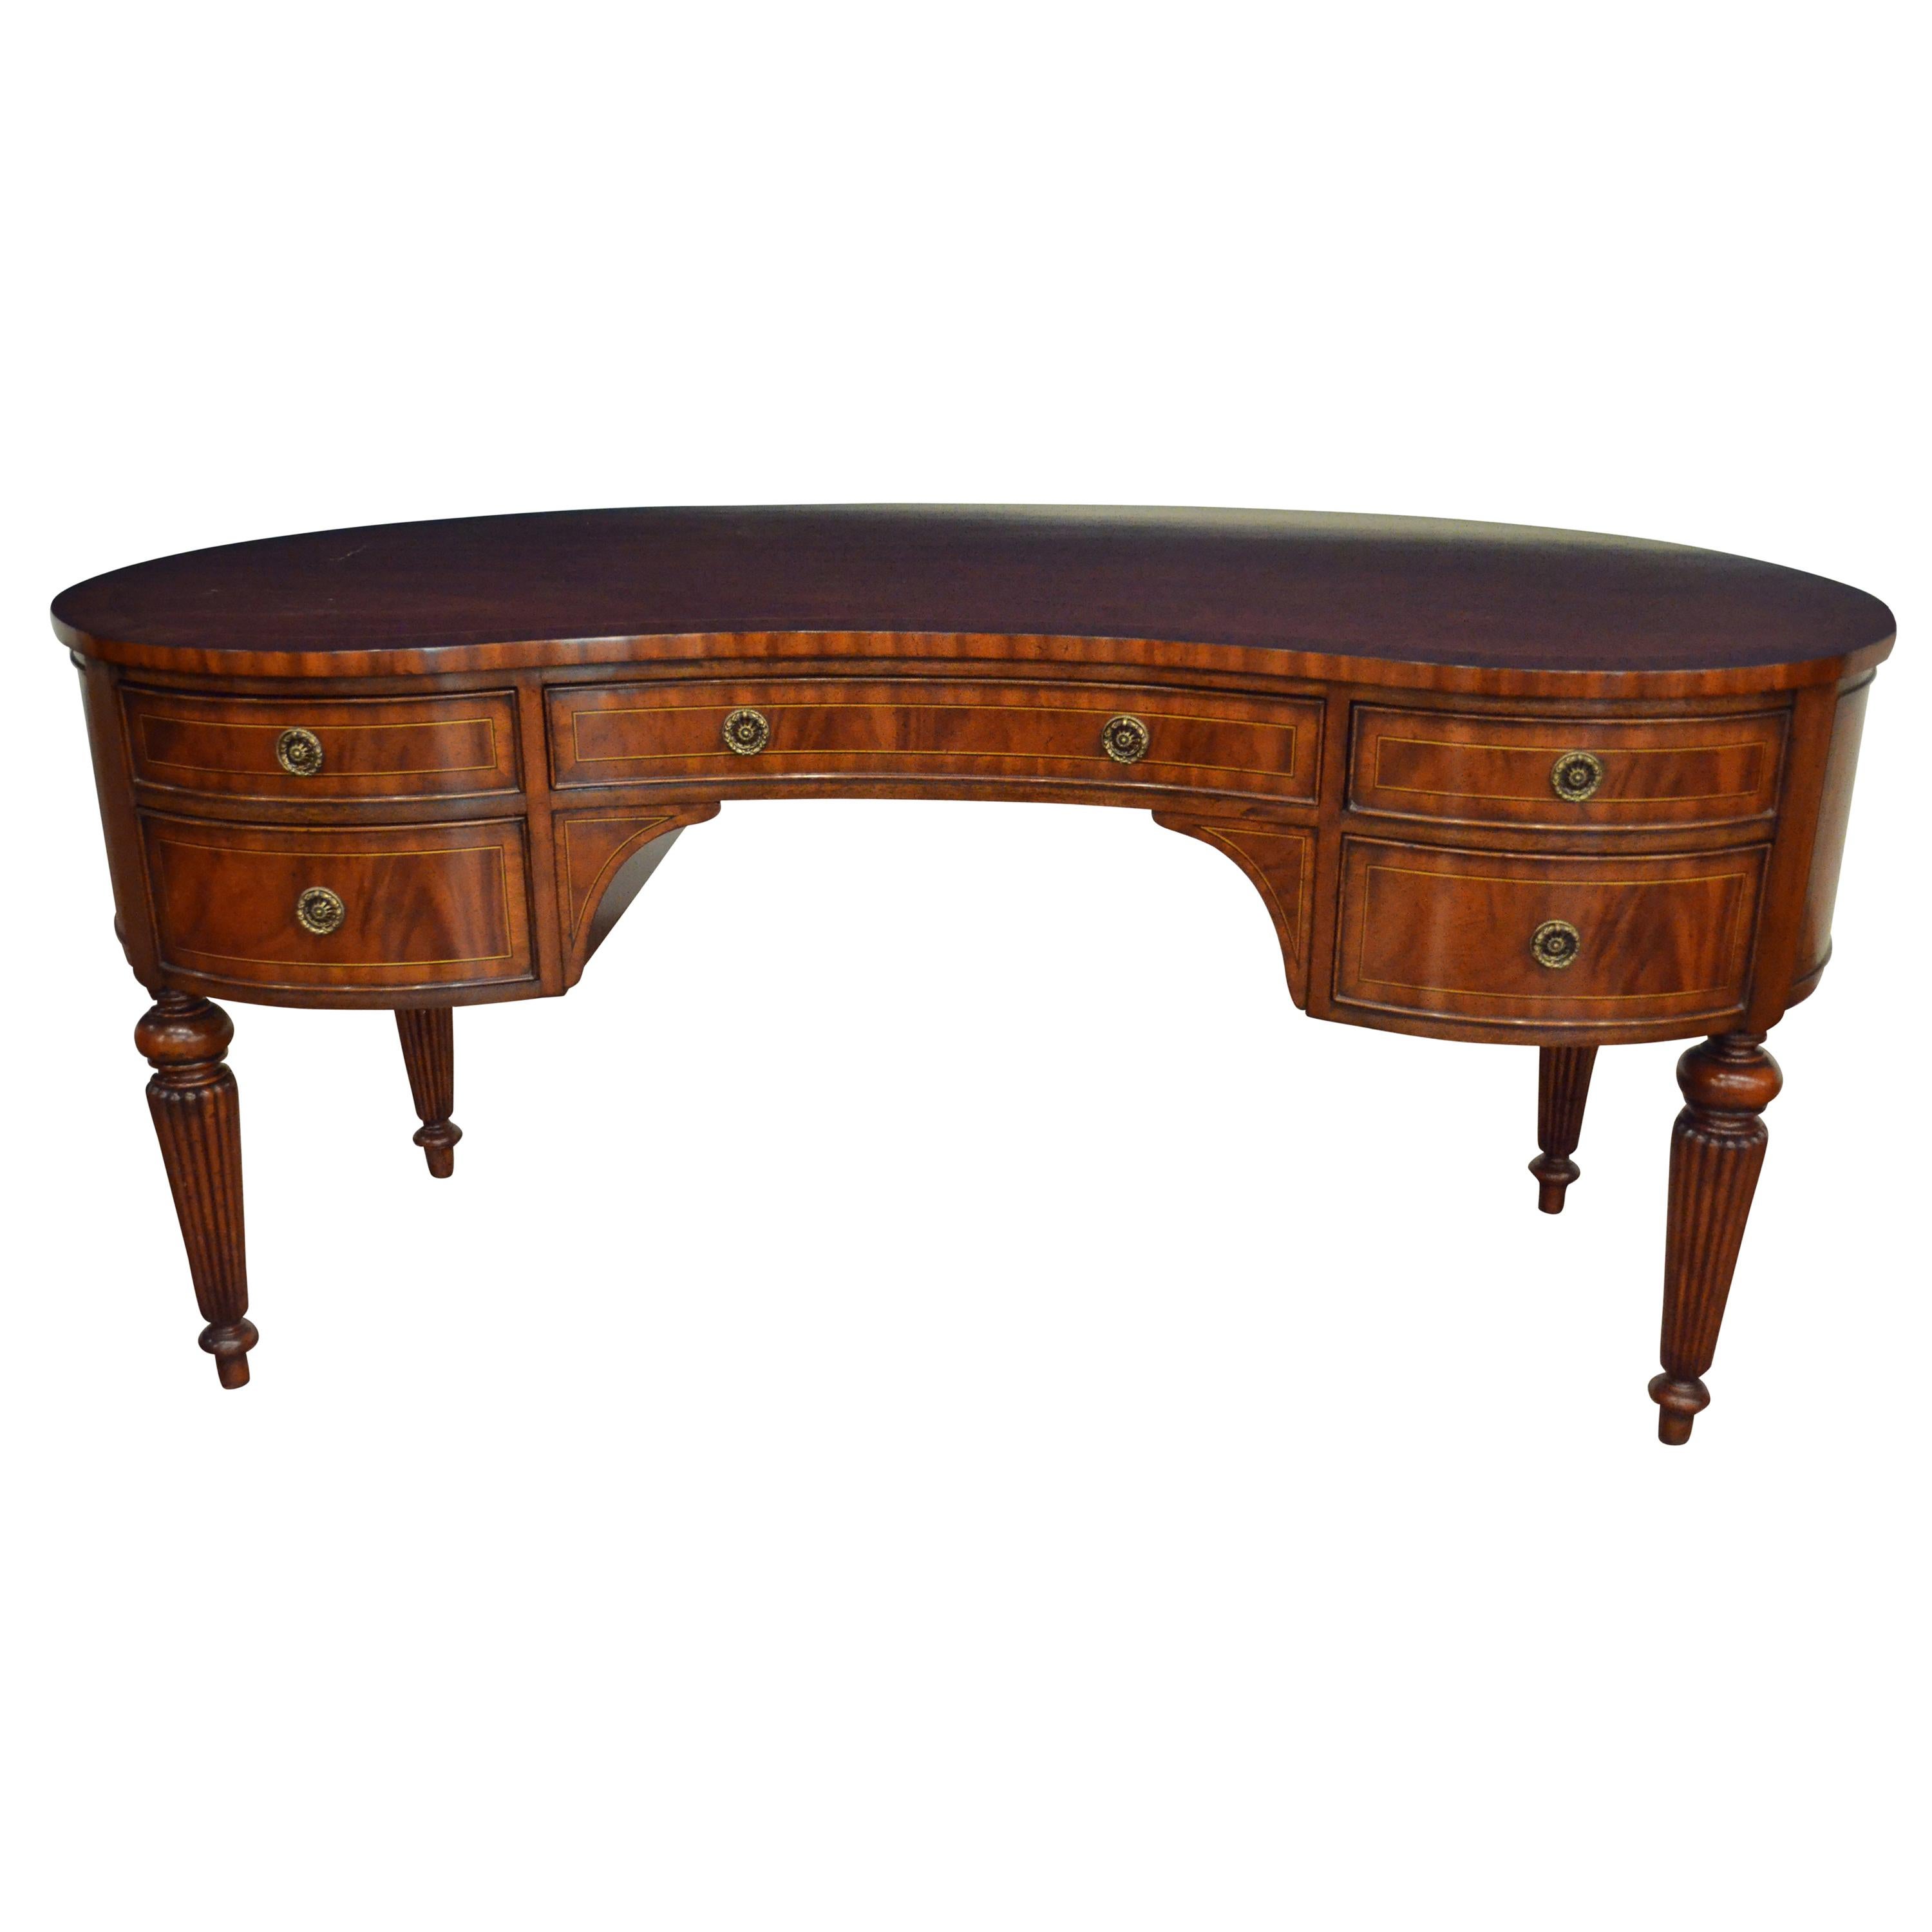 Sheraton Style Kidney Shaped Writing Desk by Leighton Hall For Sale